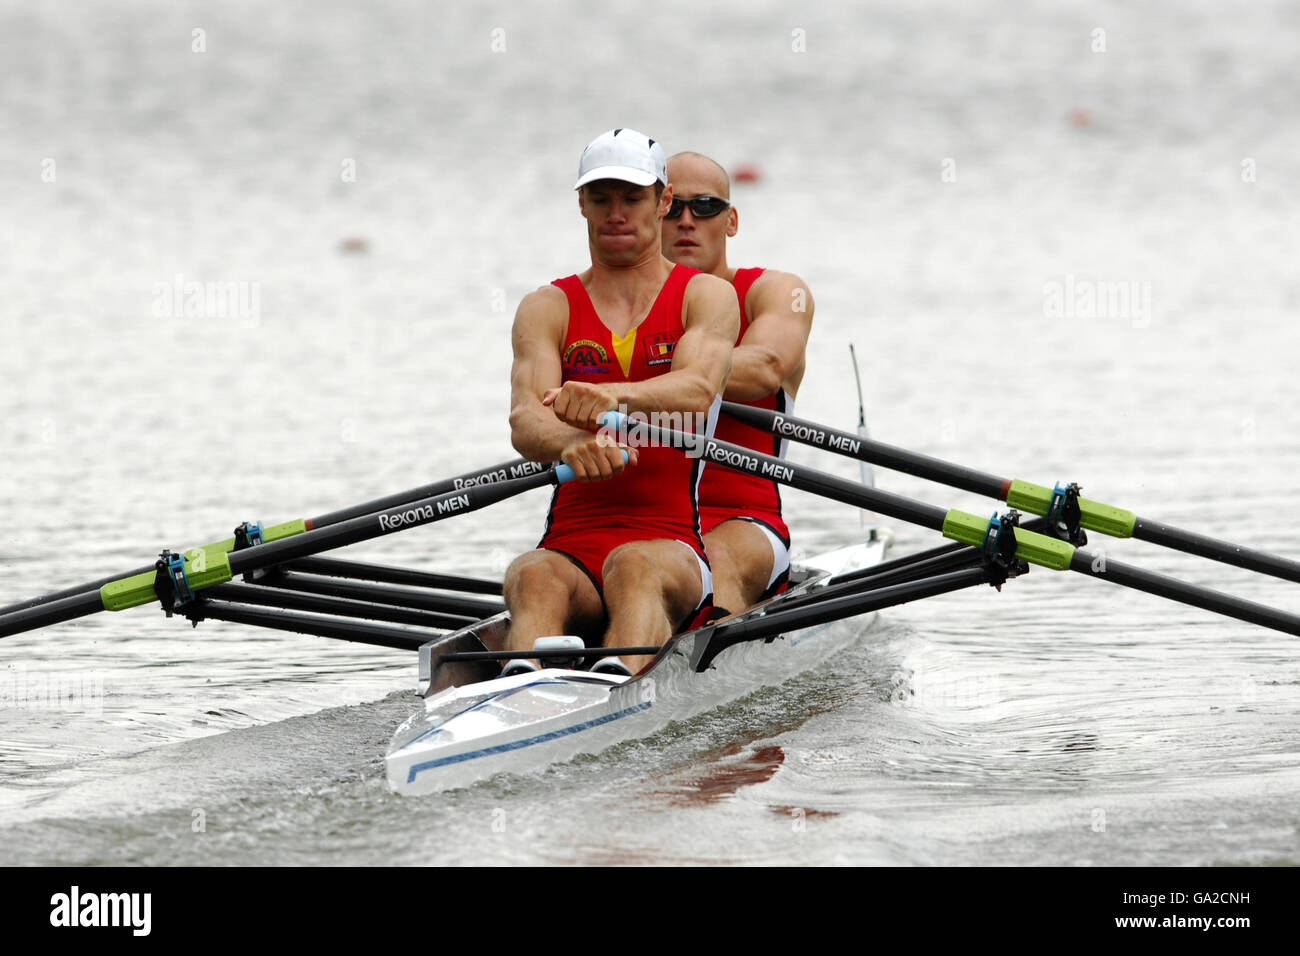 Belgium's Christophe Raes (left) and Stijn Smulders compete in the mens double sculls - heat 2 Stock Photo